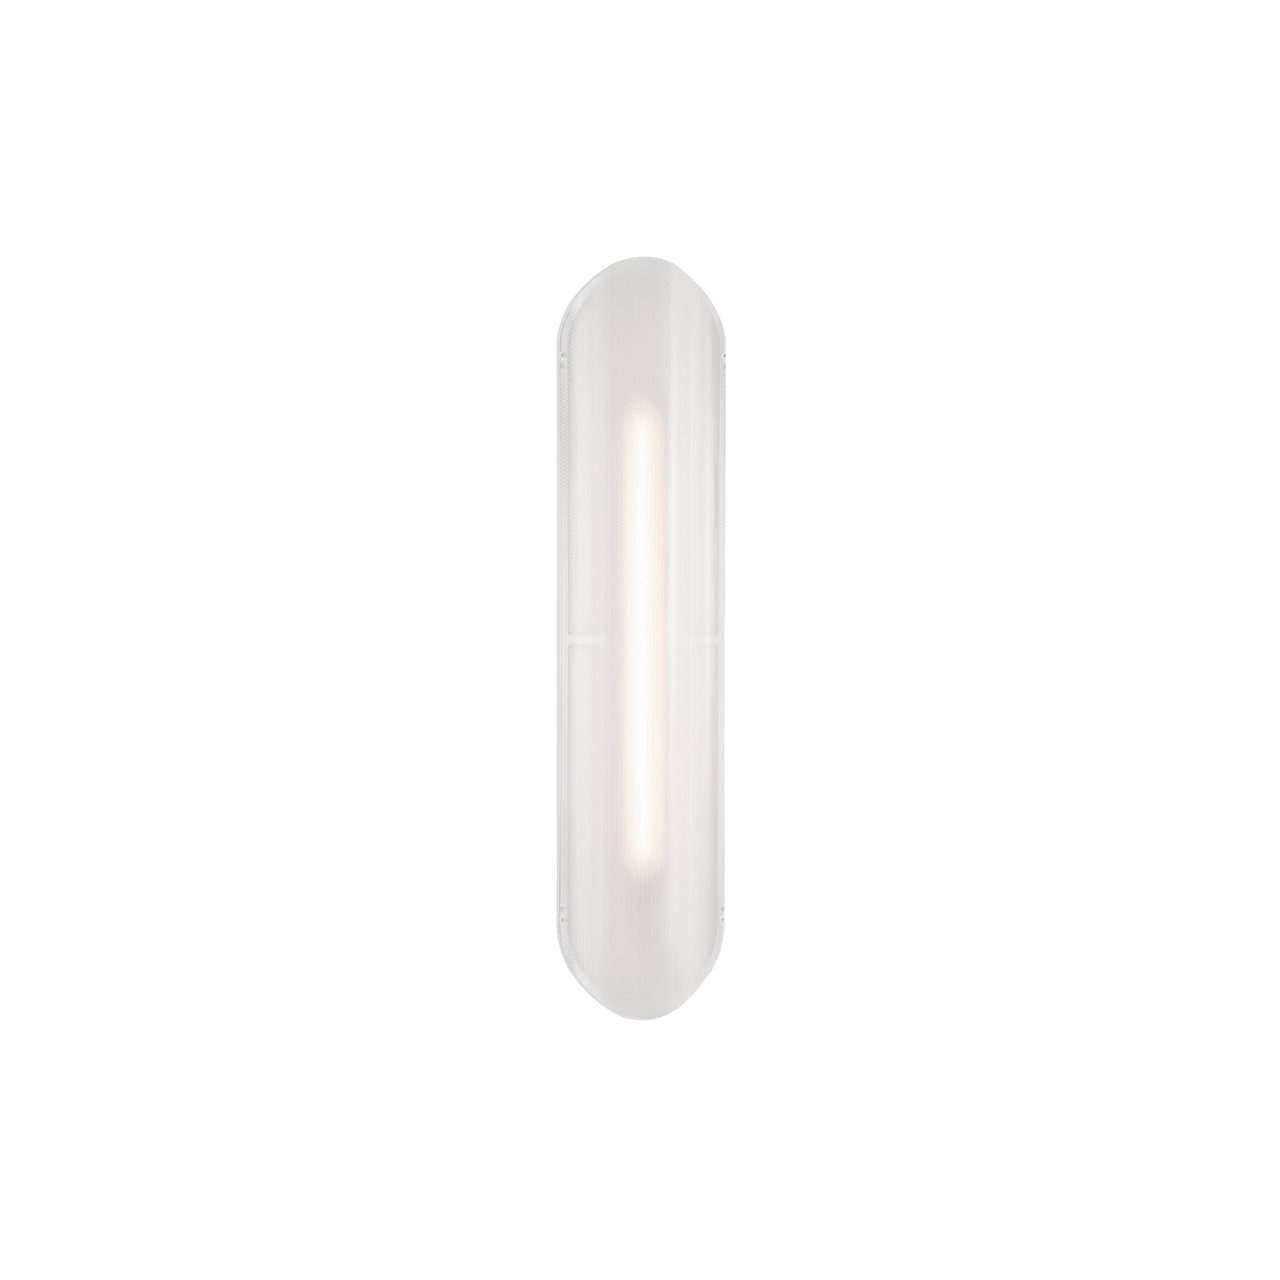 Vale System Ceiling/Wall Light: Vertical + Side-to-Side + Vale 1